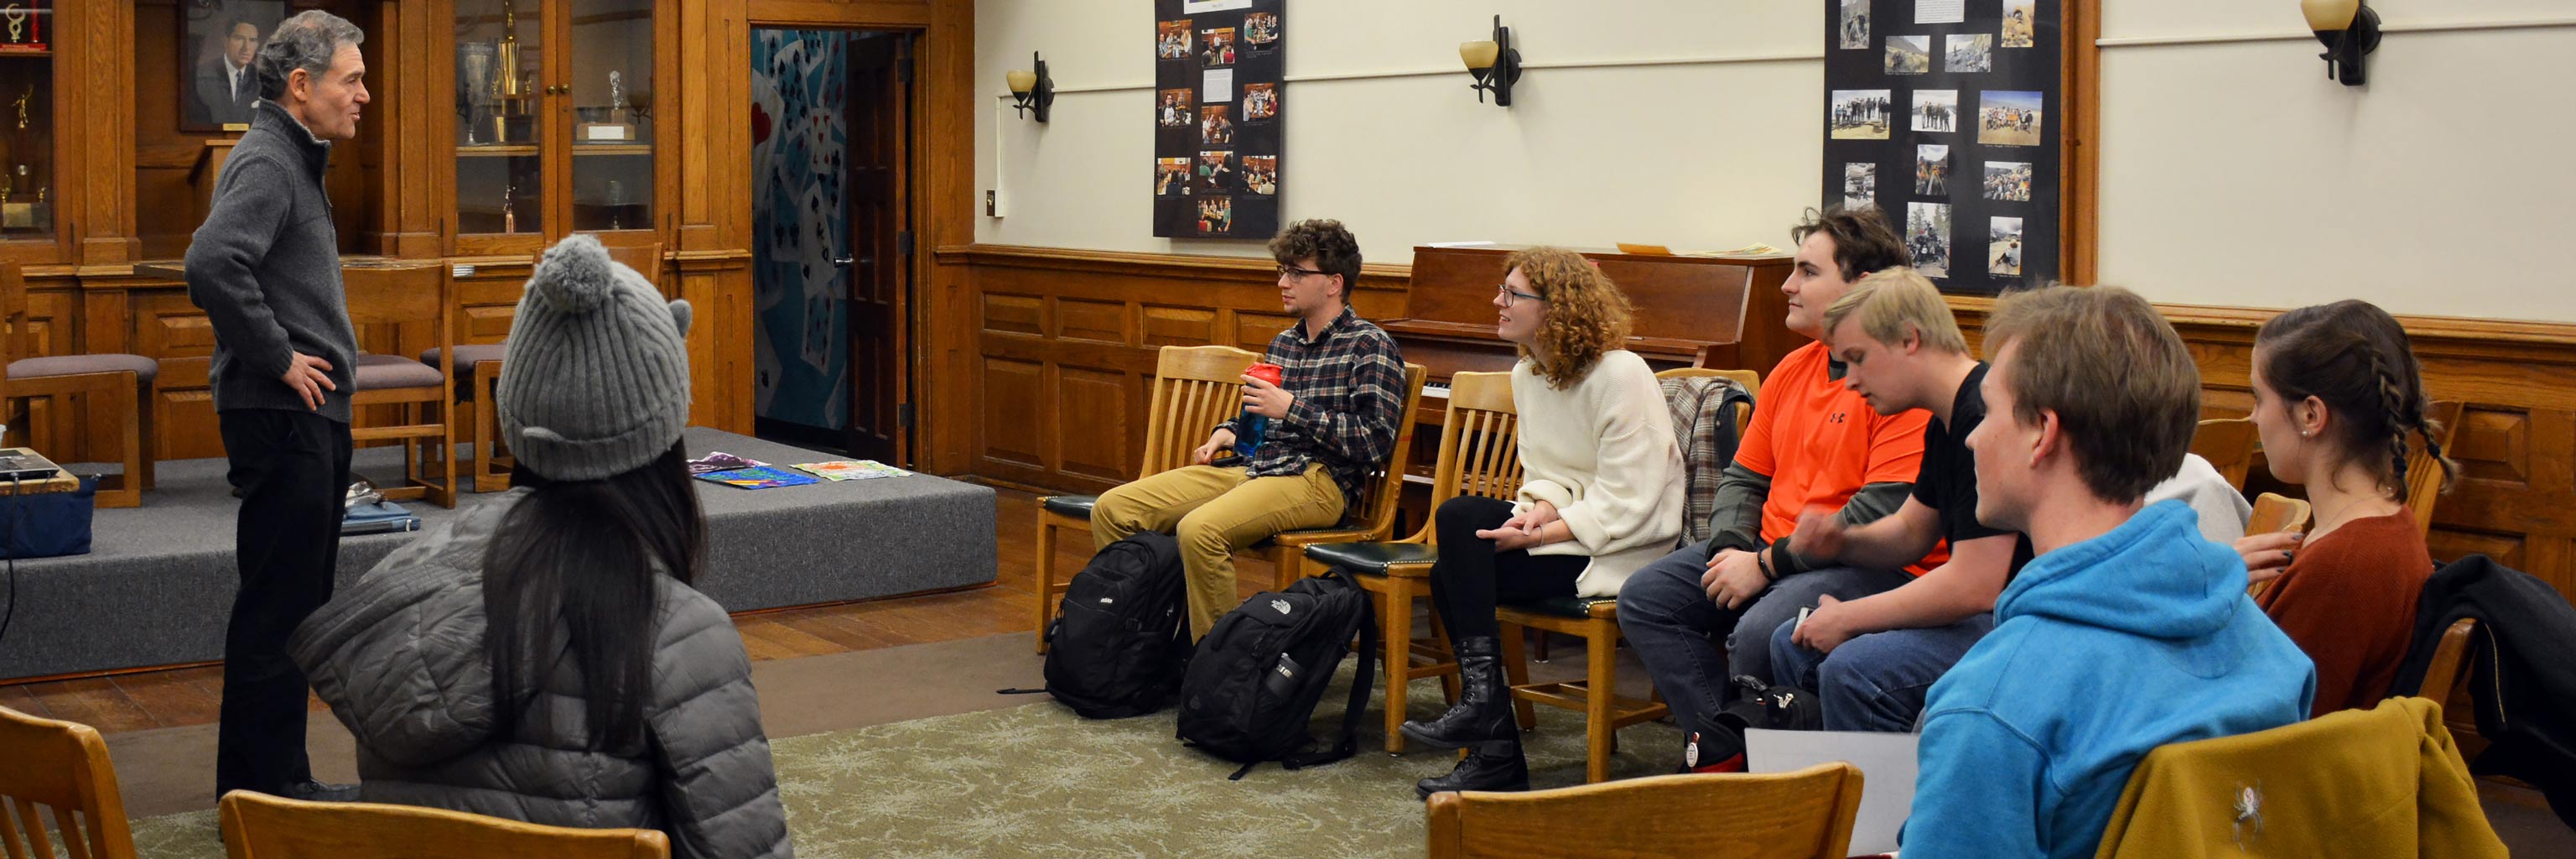 A professor lectures to a small group of engaged students